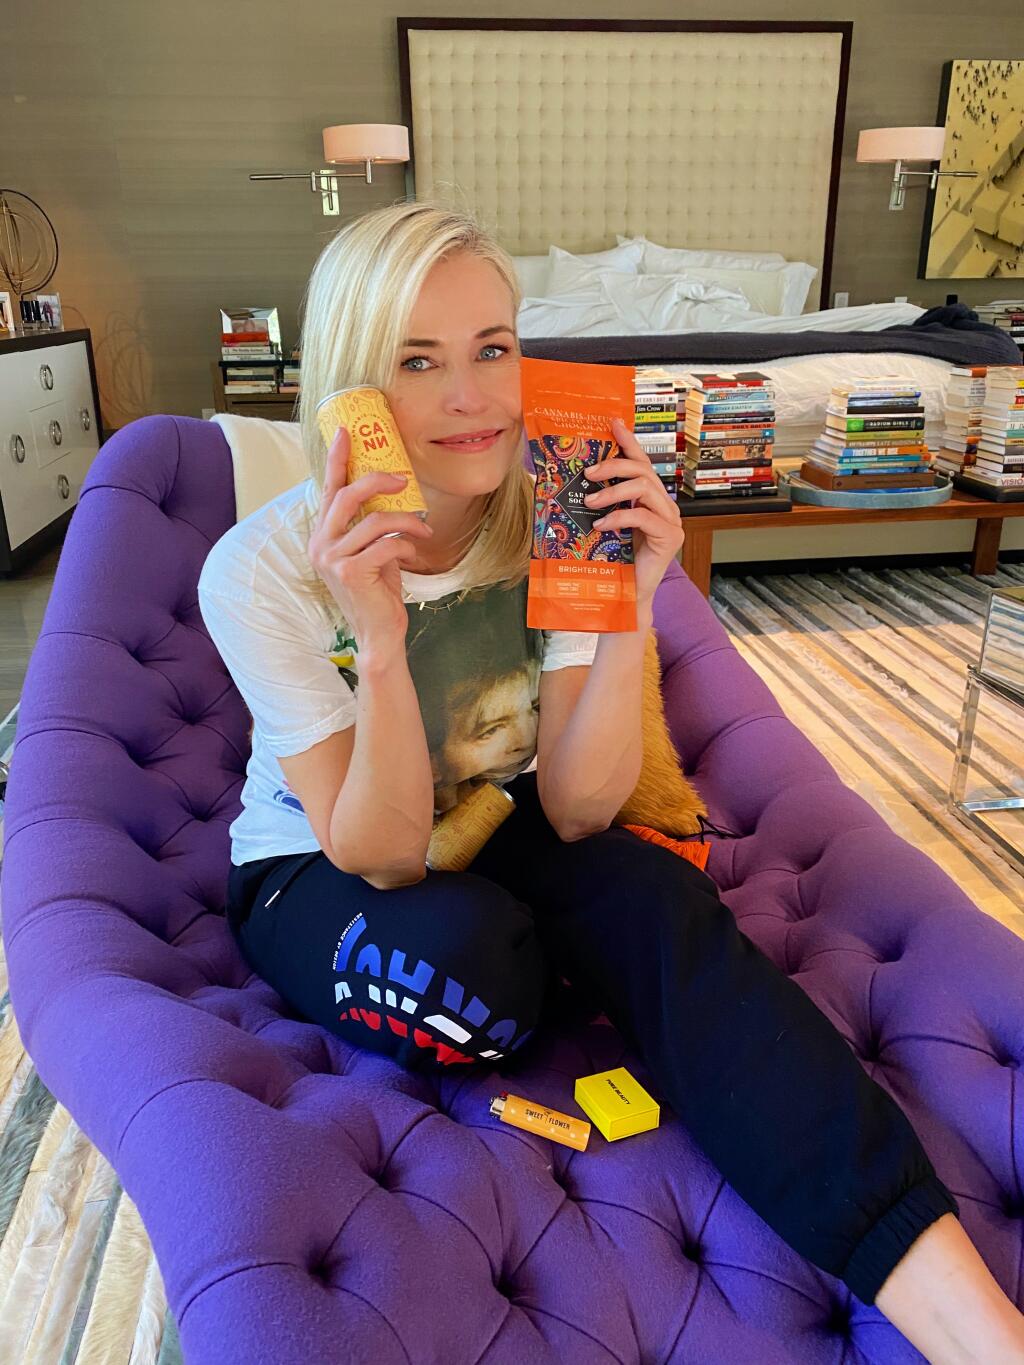 Writer, actress, activist Chelsea Handler is using a Sonoma County cannabis company’s products in her inauguration survival kits. Photo courtesy of Chelsea Handler